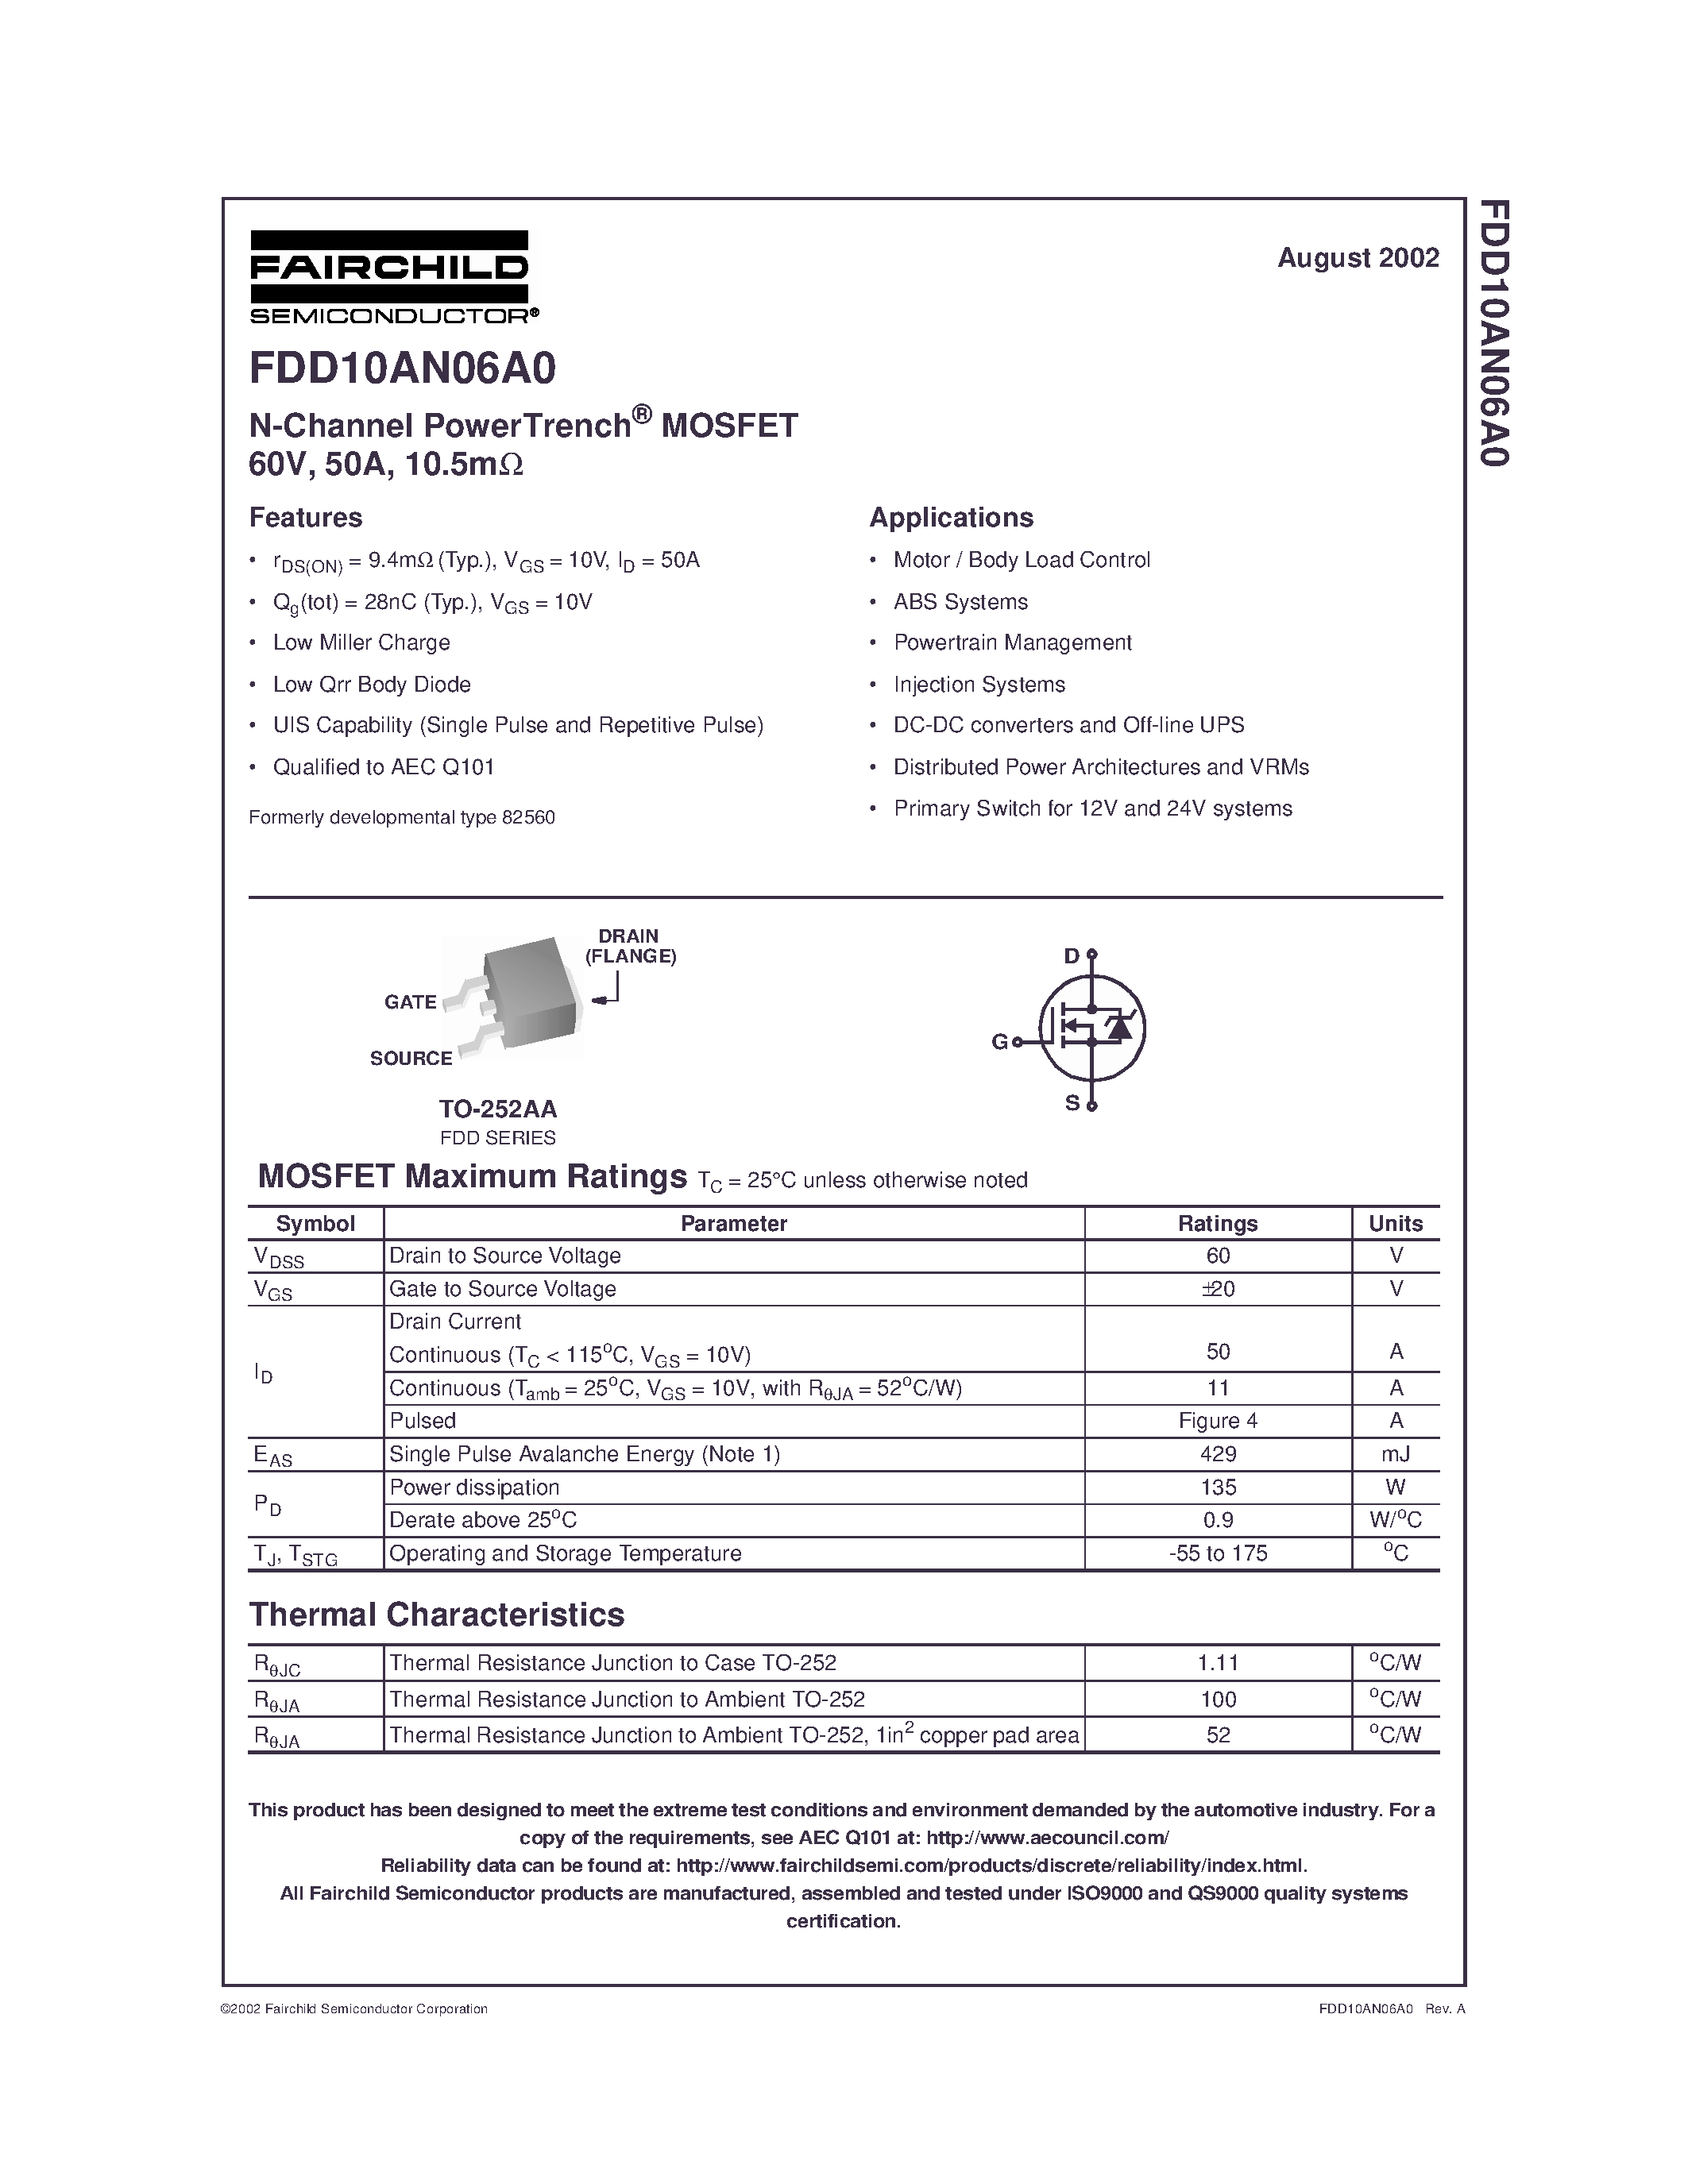 Даташит FDD10AN06A0 - N-Channel PowerTrench MOSFET 60V/ 50A/ 10.5m страница 1